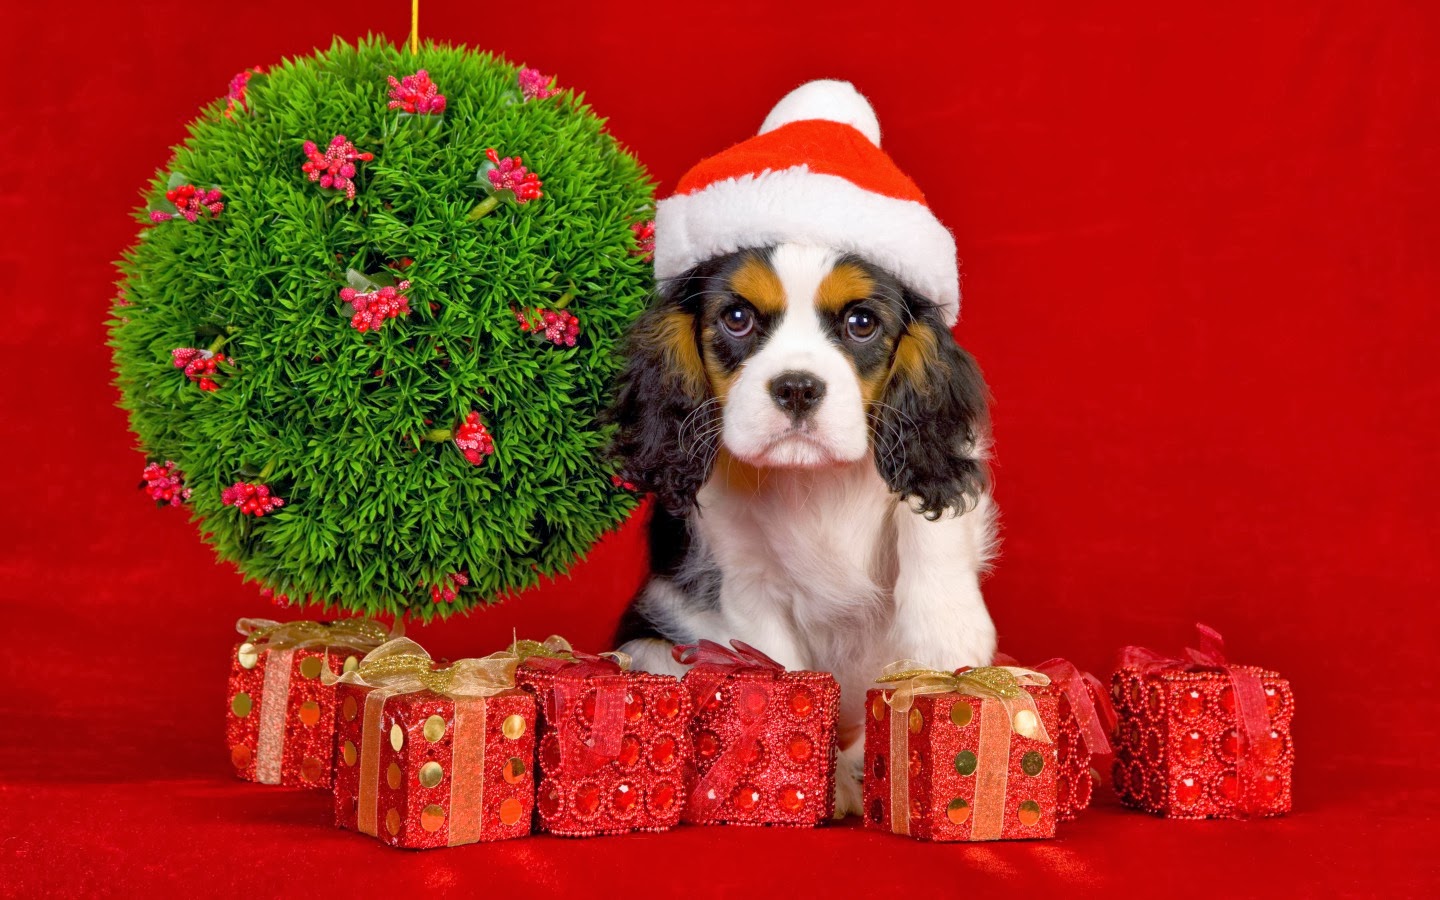 Luxury Christmas Gifts Ideas For Dogs and Dog Lovers